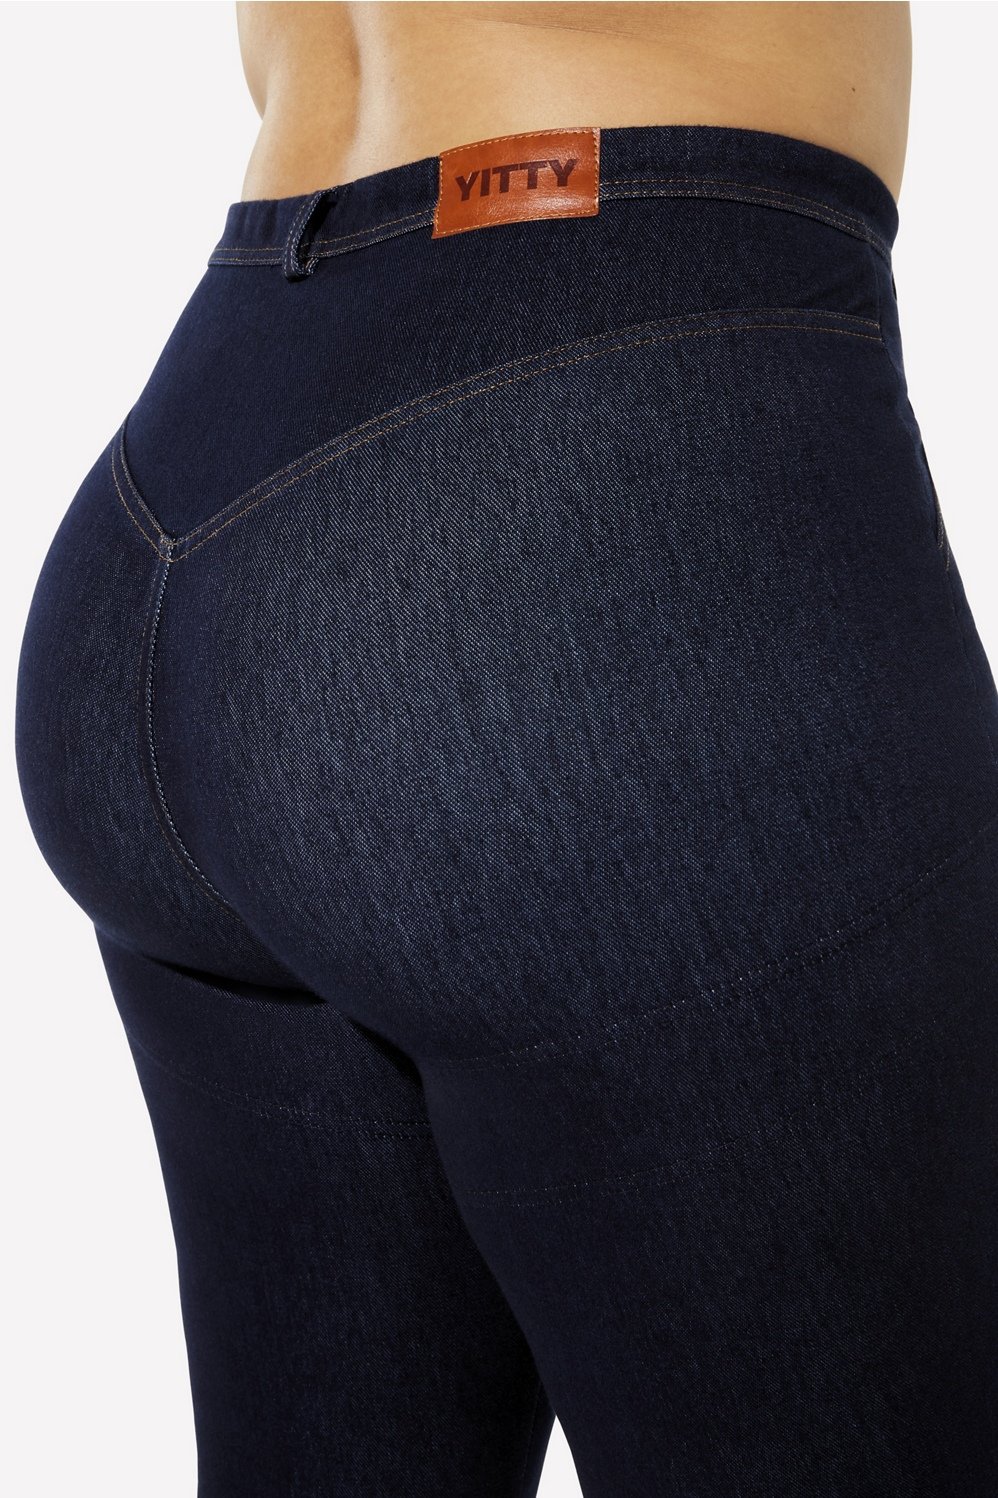 PoshSnob - Fall Denim! They look like jeans but they fit like leggings! We  are adding new 4 way stretch cheeky jeggings daily! Shop now at www.PoshSnob.com  or click link in bio